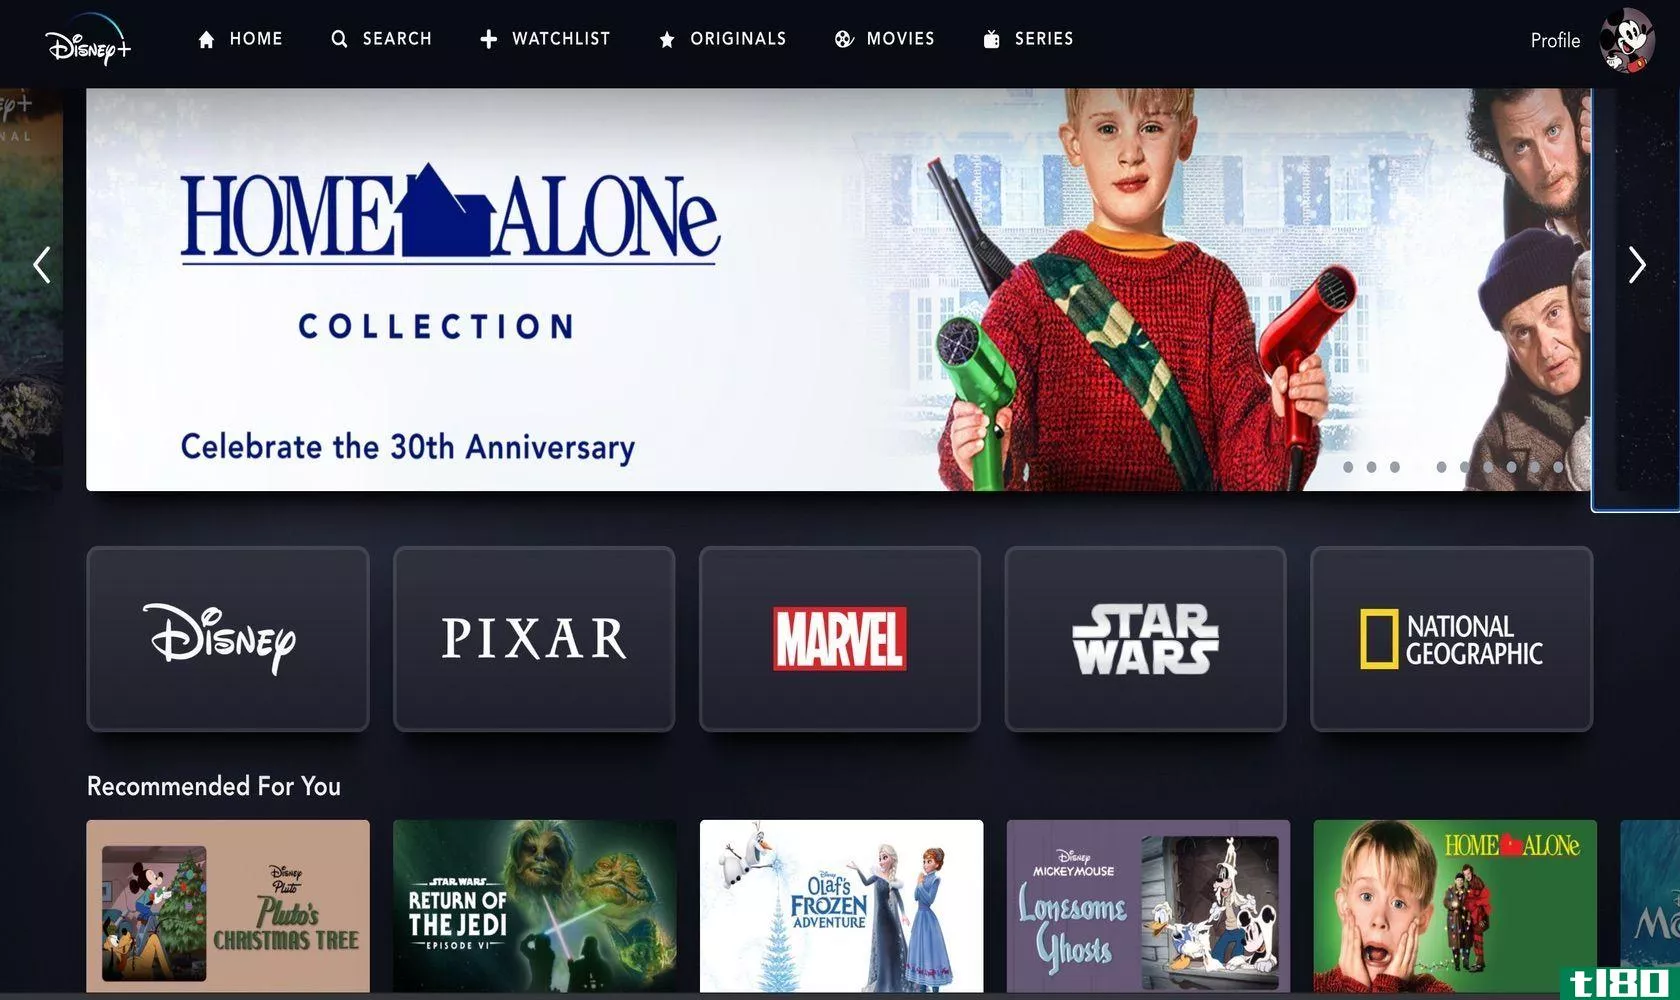 Disney+ main page of application